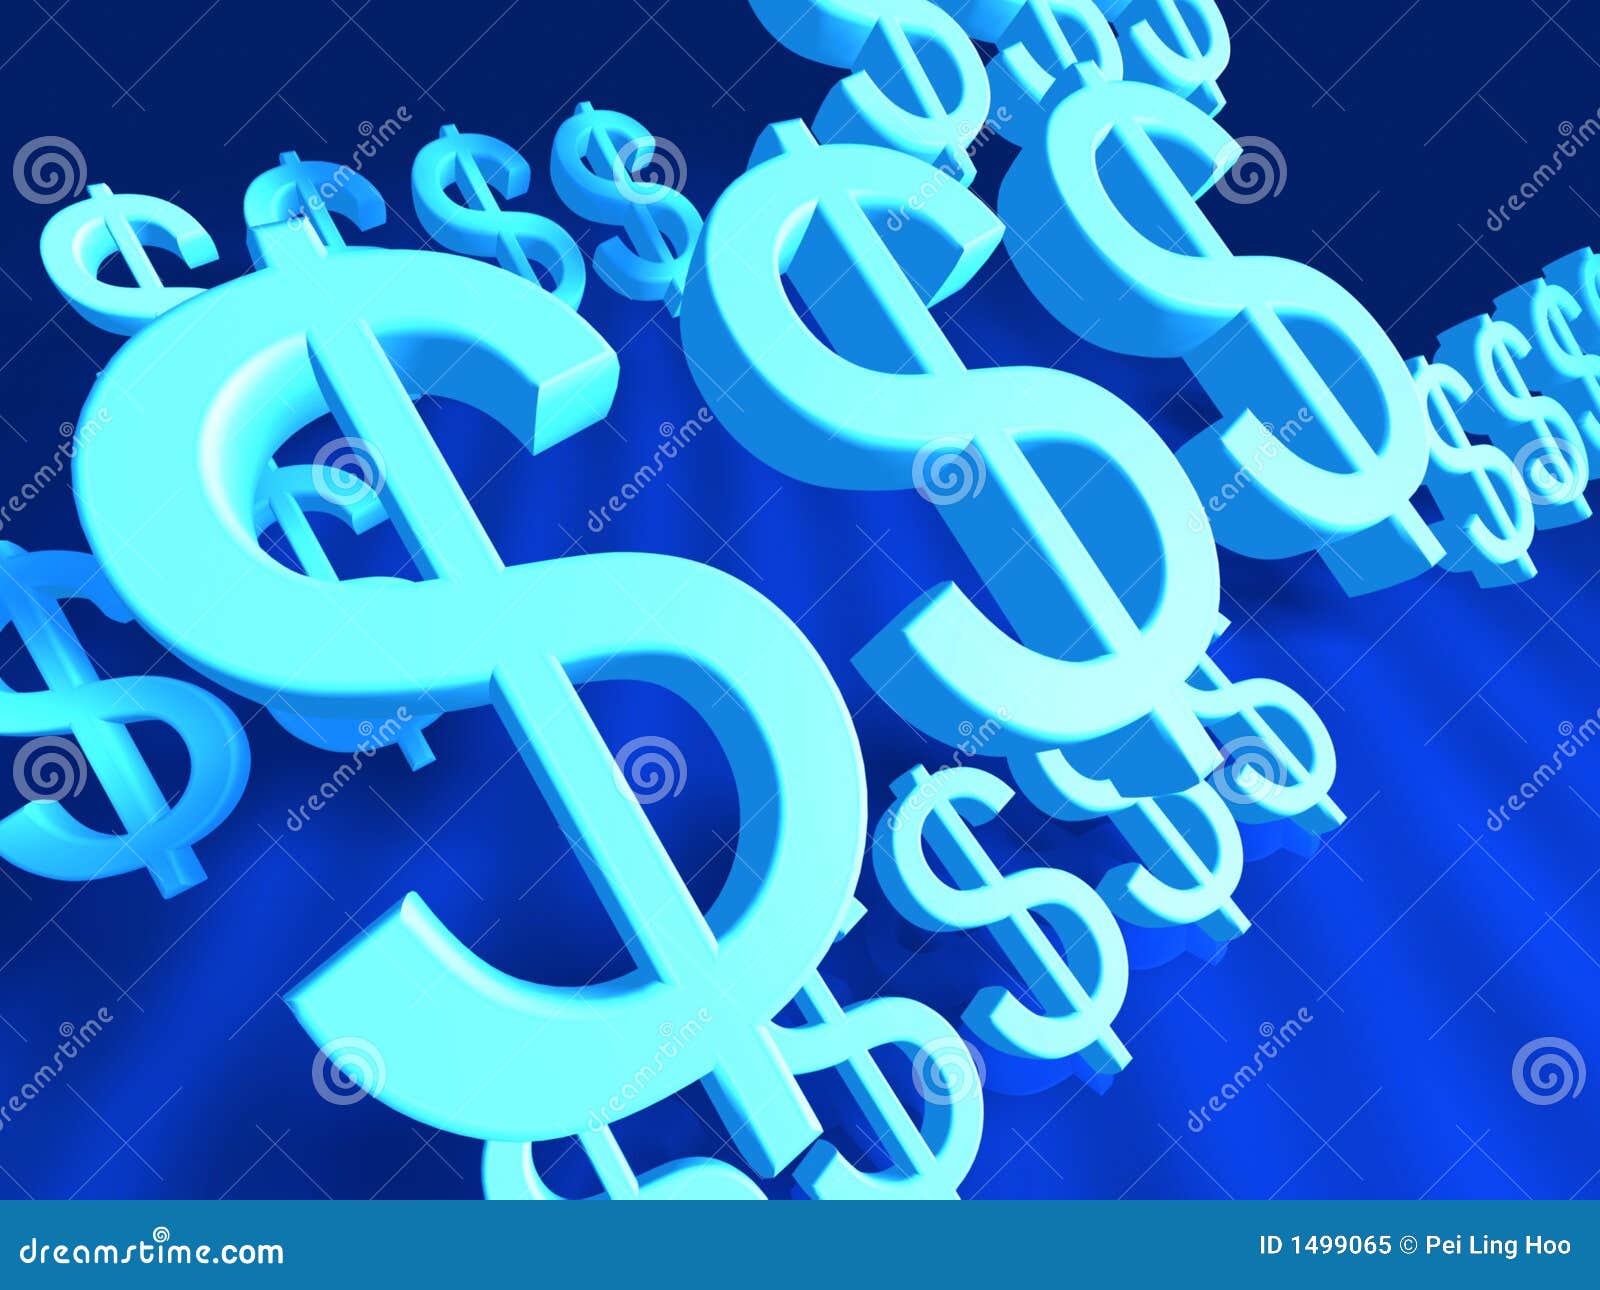 clipart flying dollar sign - photo #33